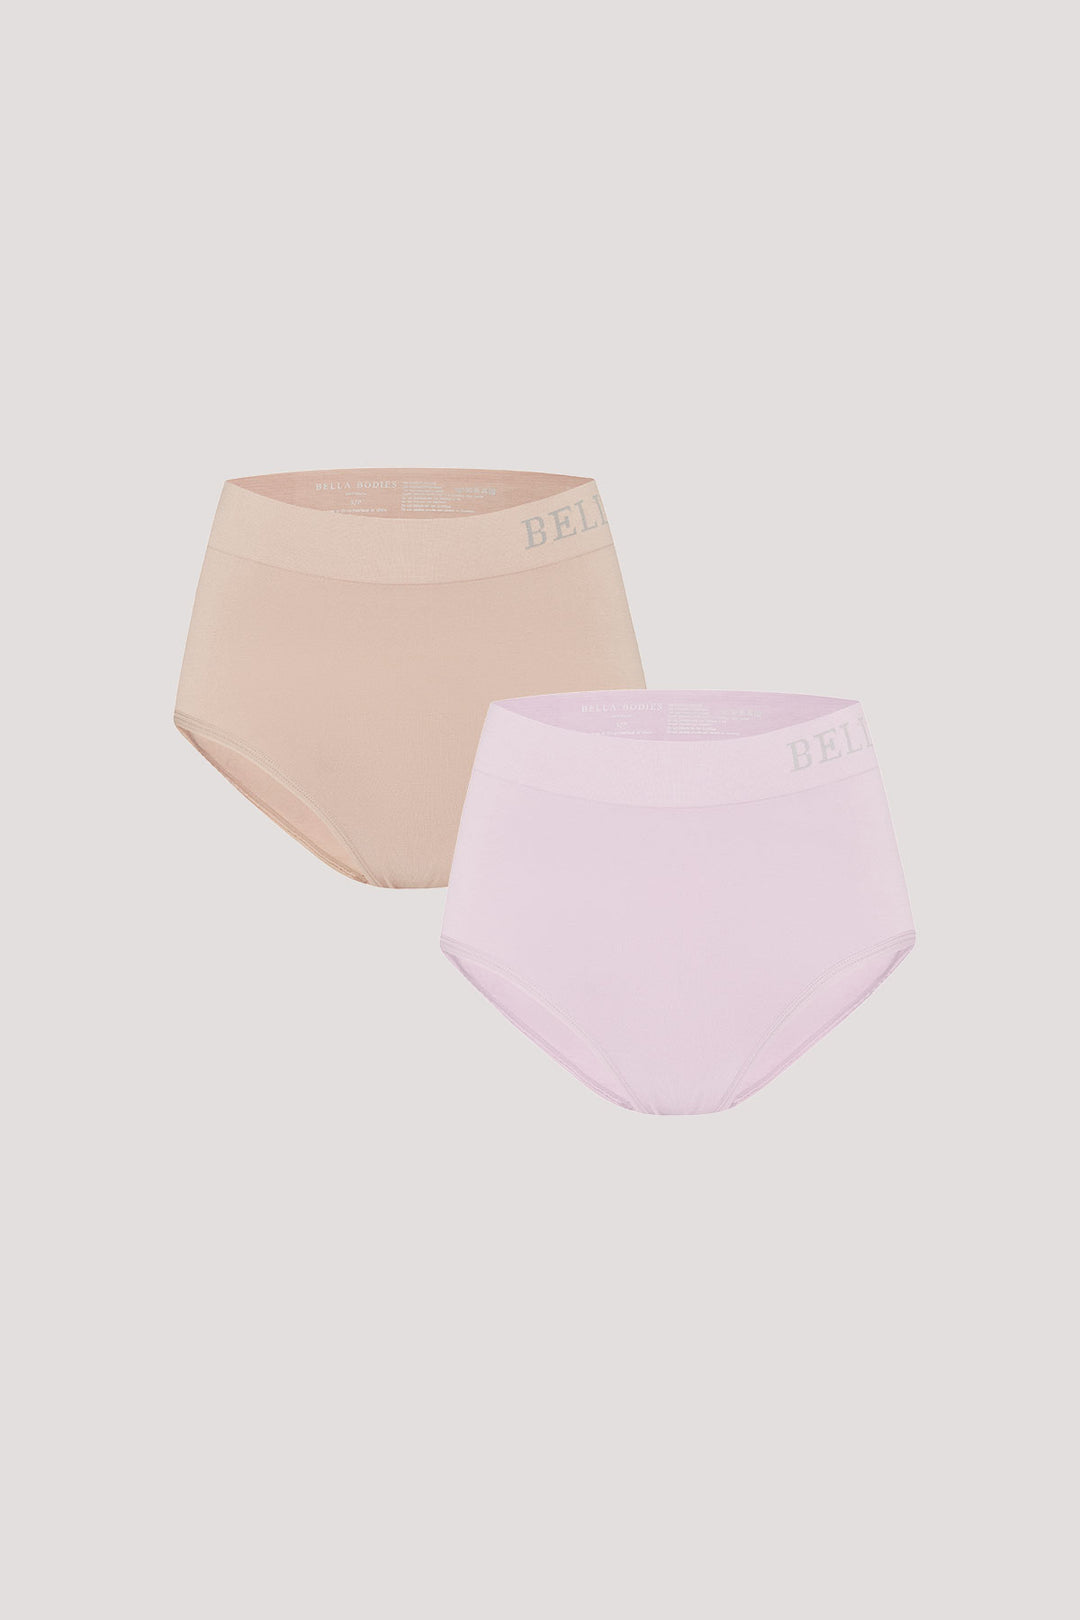 Women's Breathable Bamboo High Waist Underwear 2 pack | Bella Bodies Australia | Sand and Soft Lilac